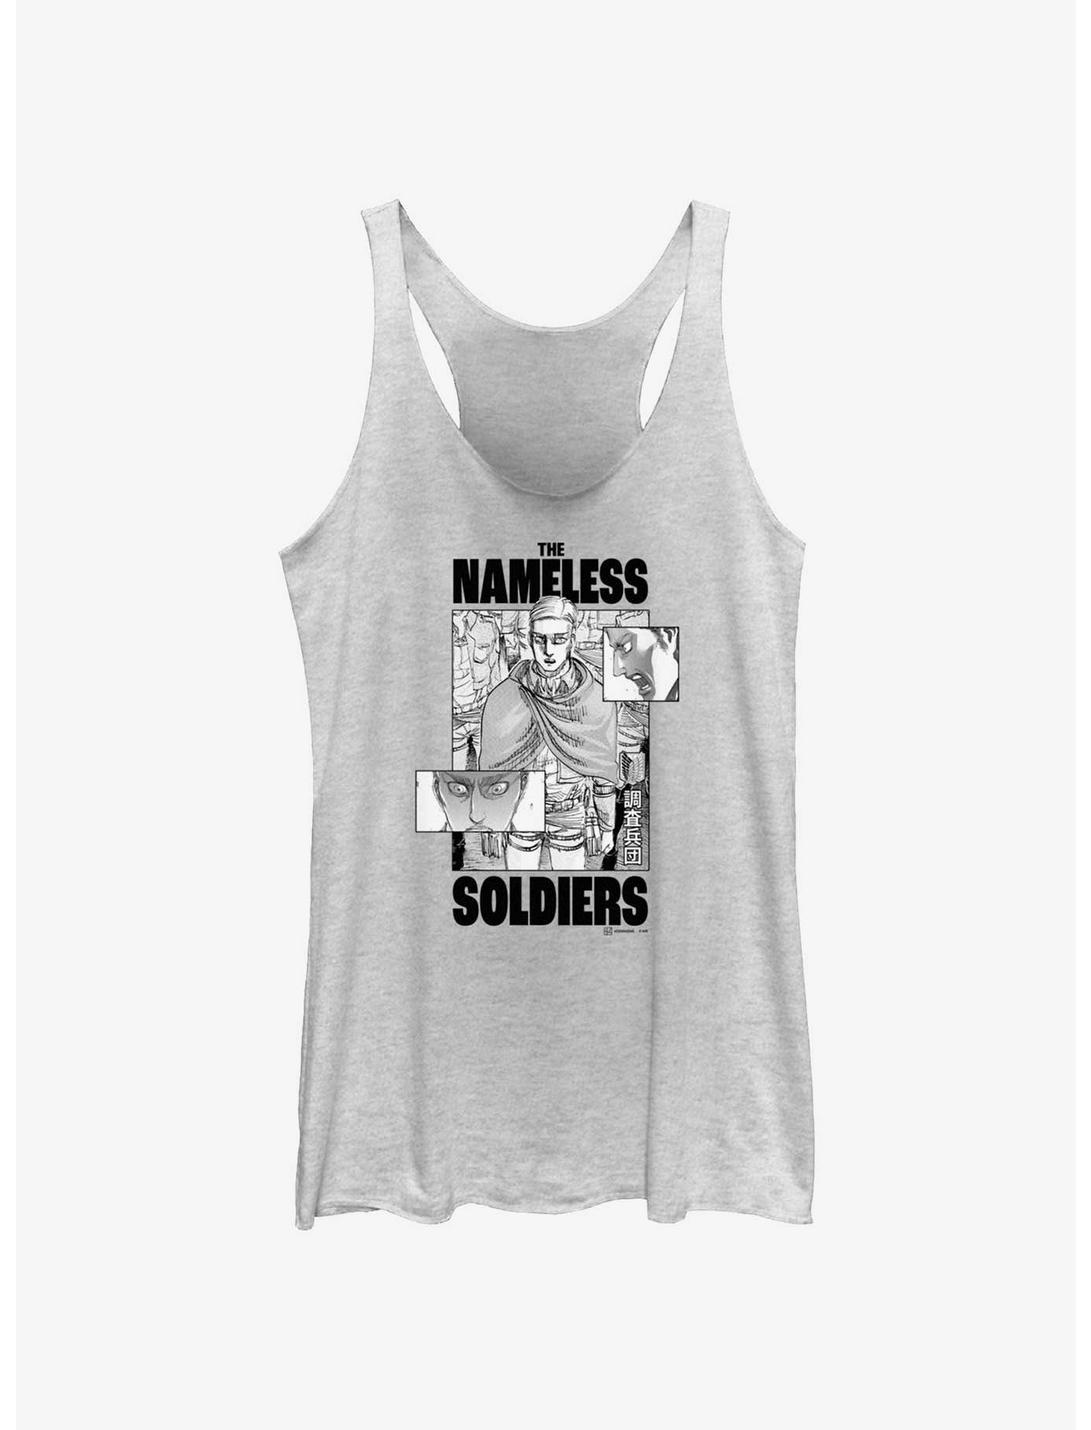 Attack on Titan The Nameless Soldiers Womens Tank Top, WHITE HTR, hi-res